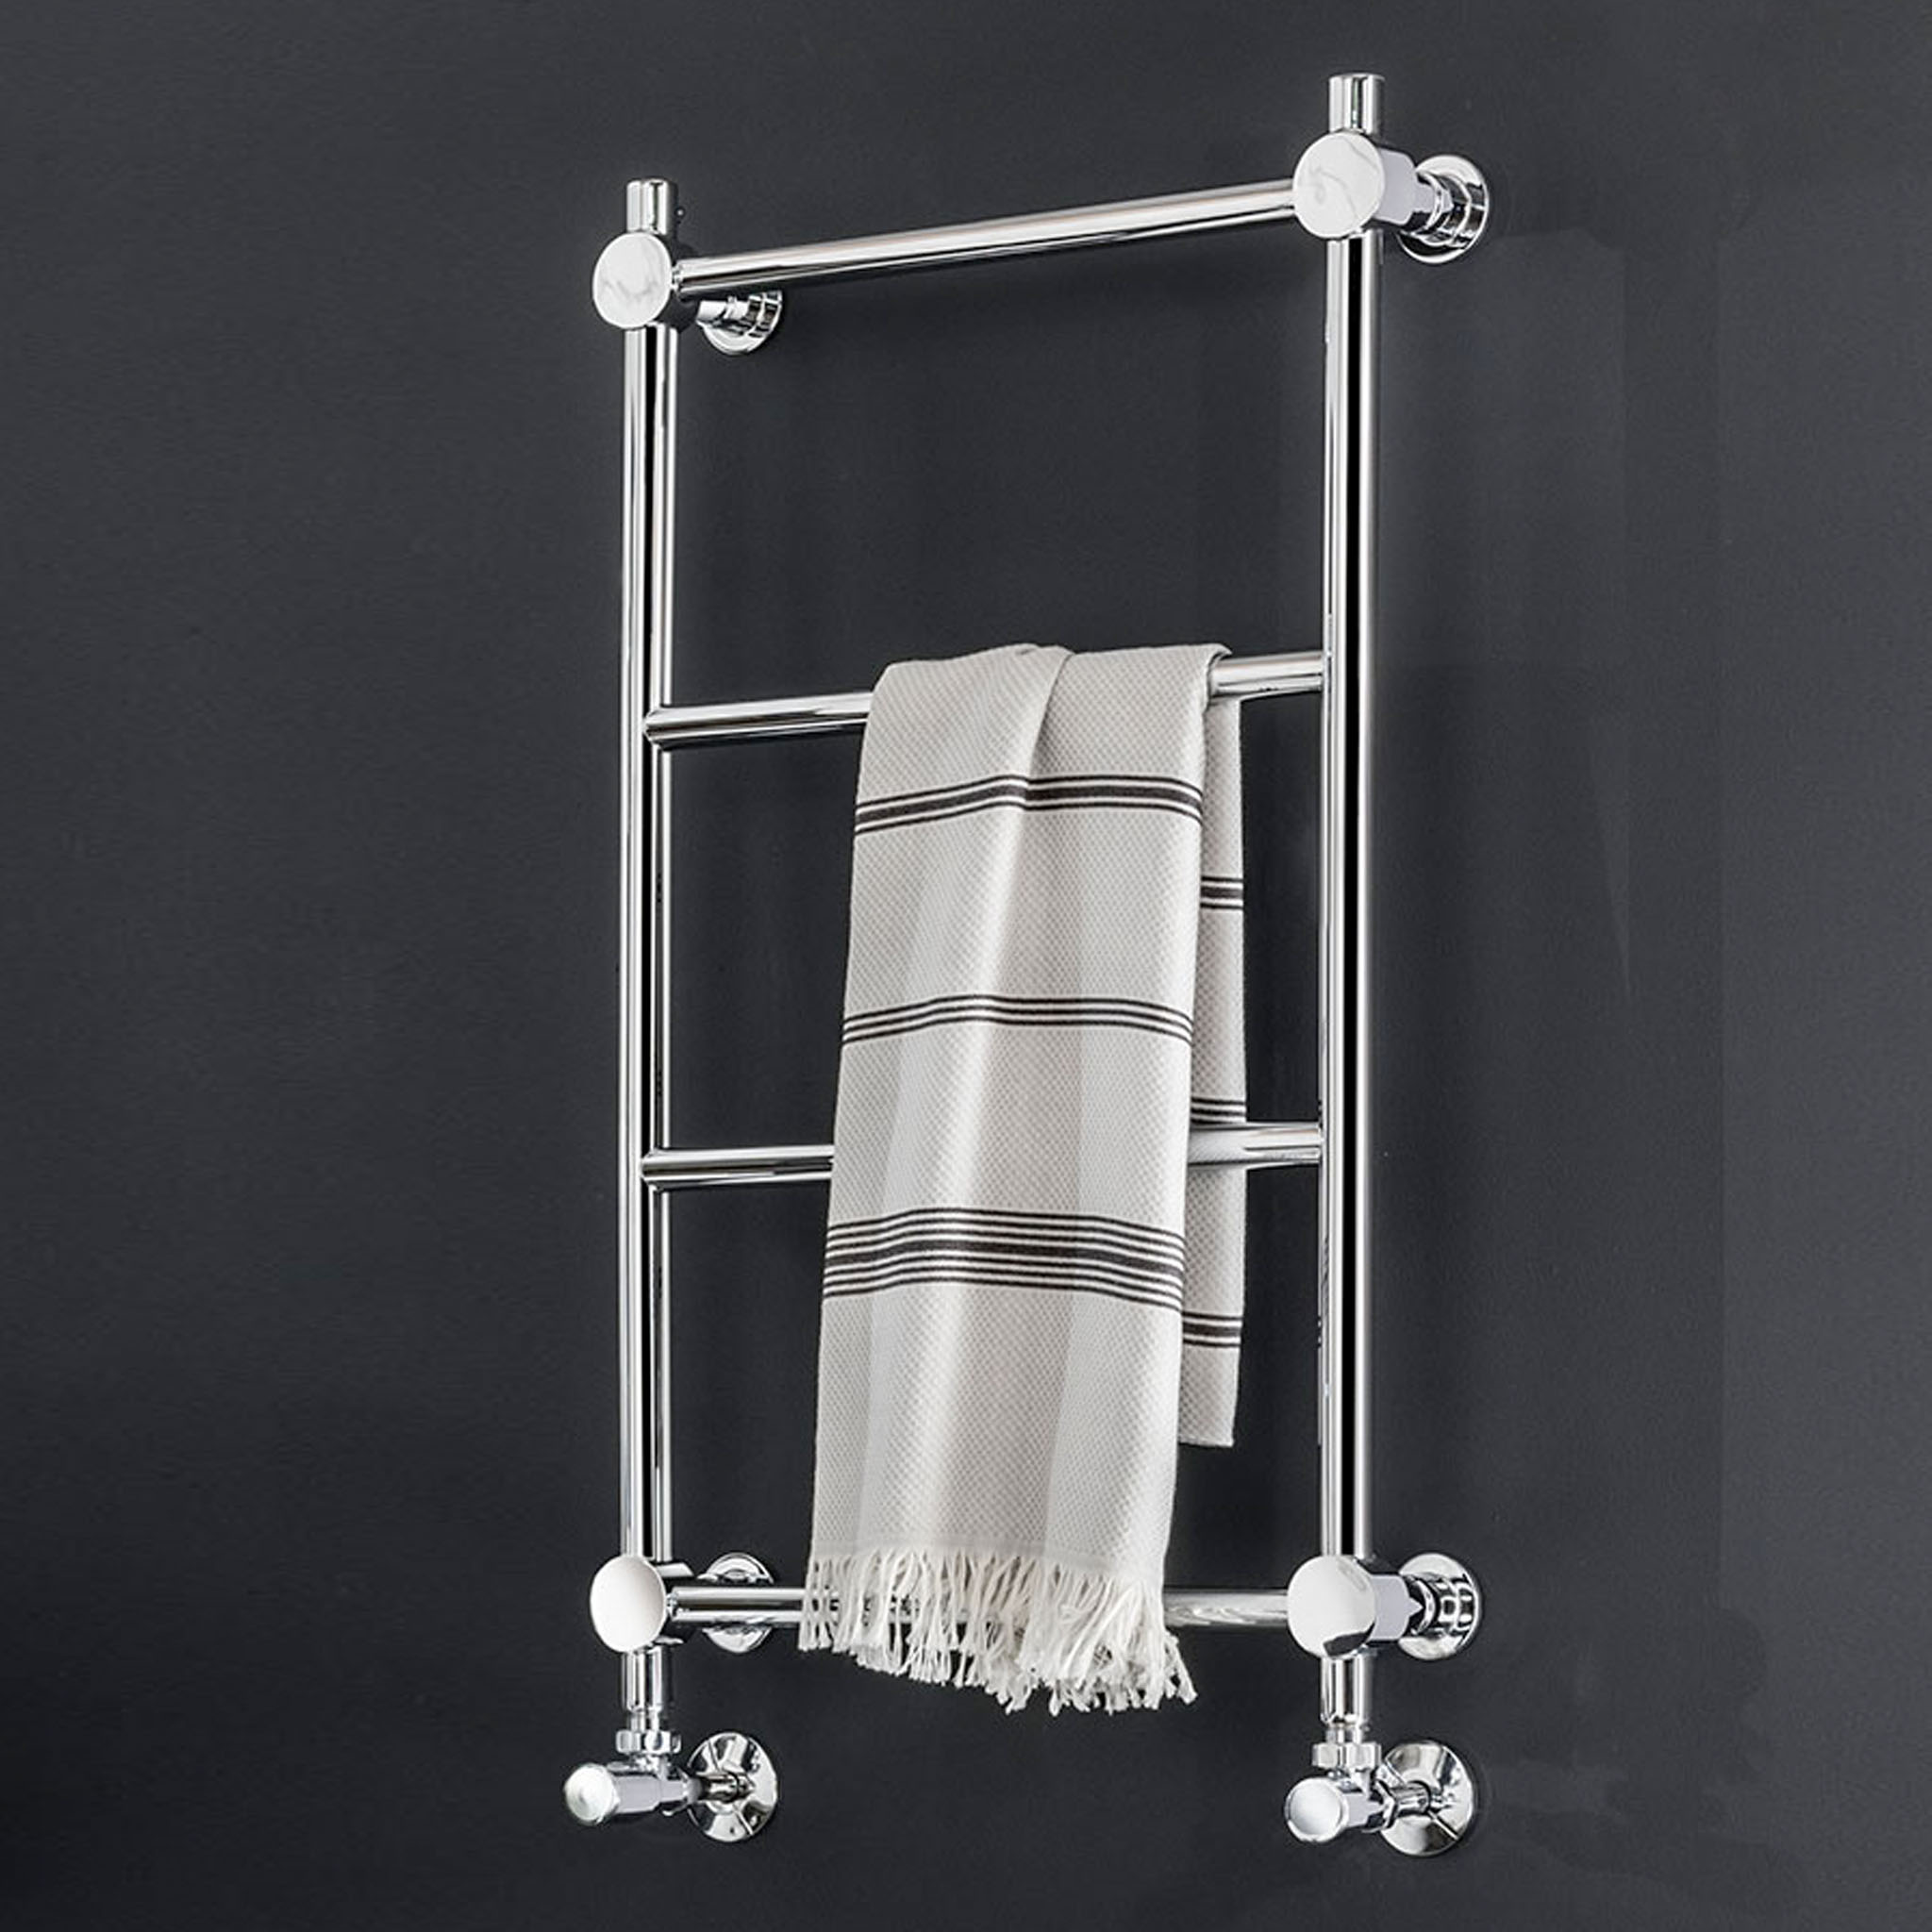 Vogue Venture Wall Mounted Heated Towel Rail